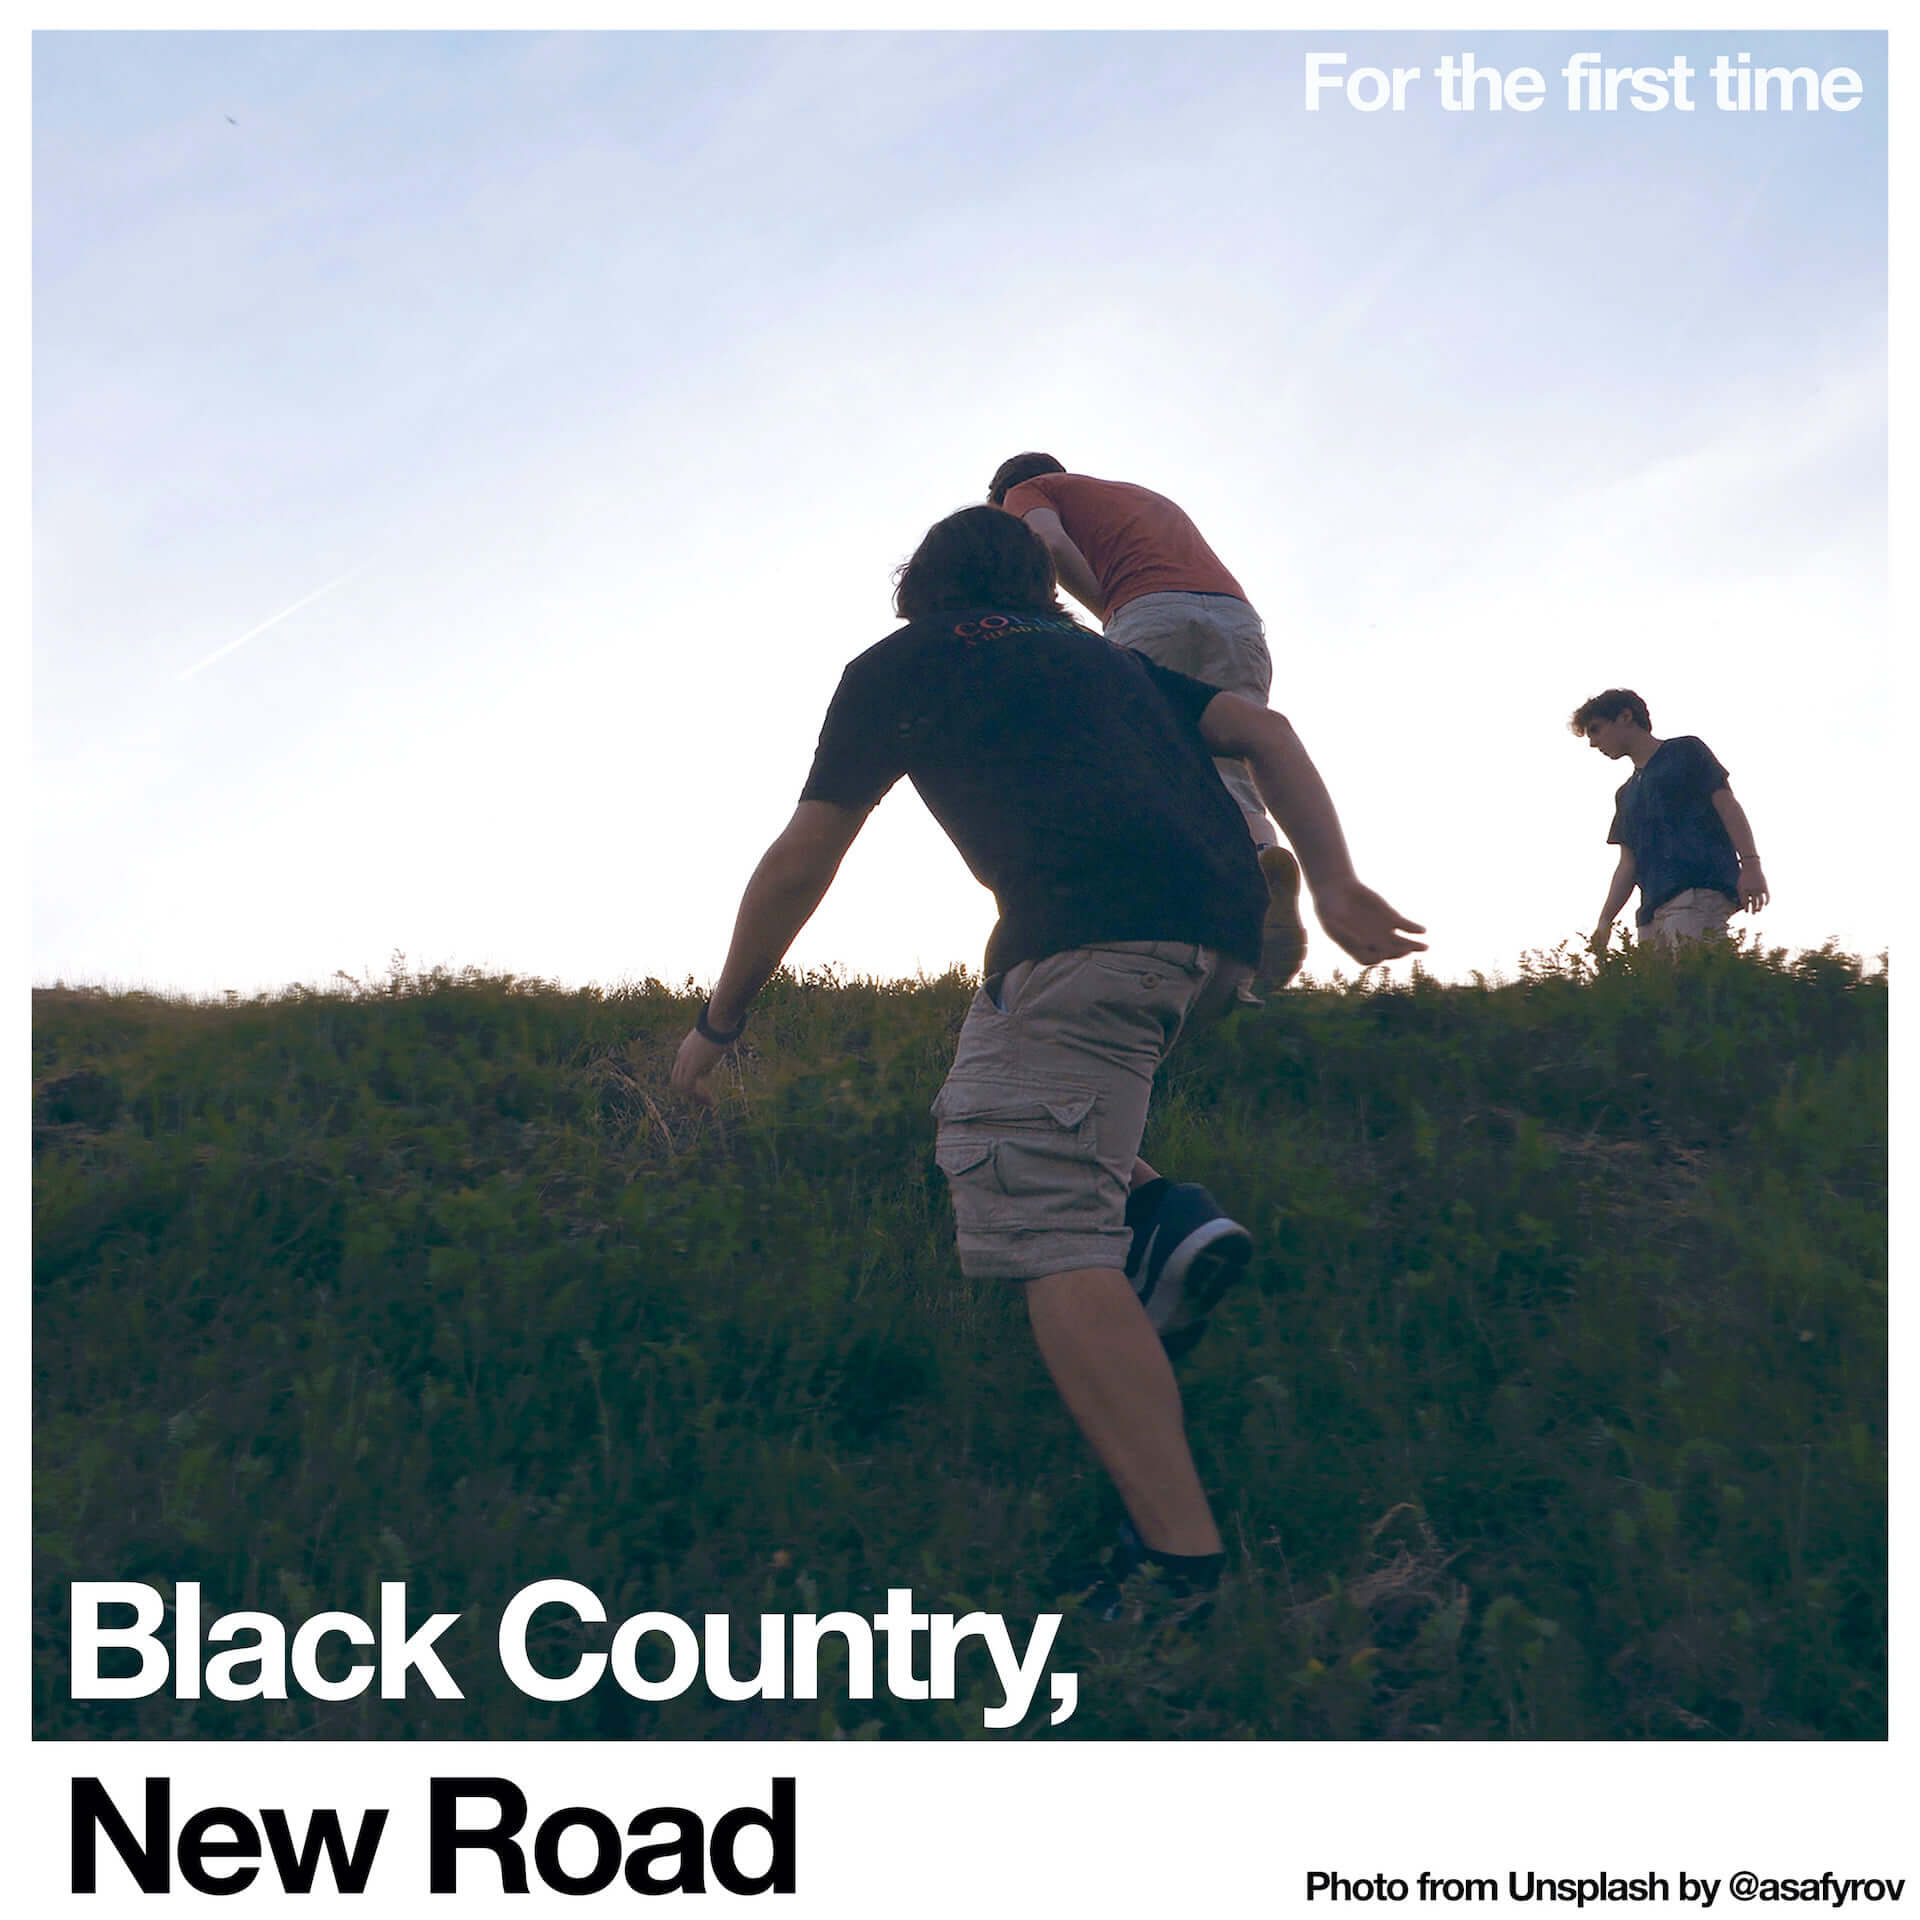 Black Country, New Roadのデビュー作『For the first time』がリリース！〈BIG LOVE RECORDS〉とのコラボTシャツも発売 music210205_bcnr_1-1920x1920